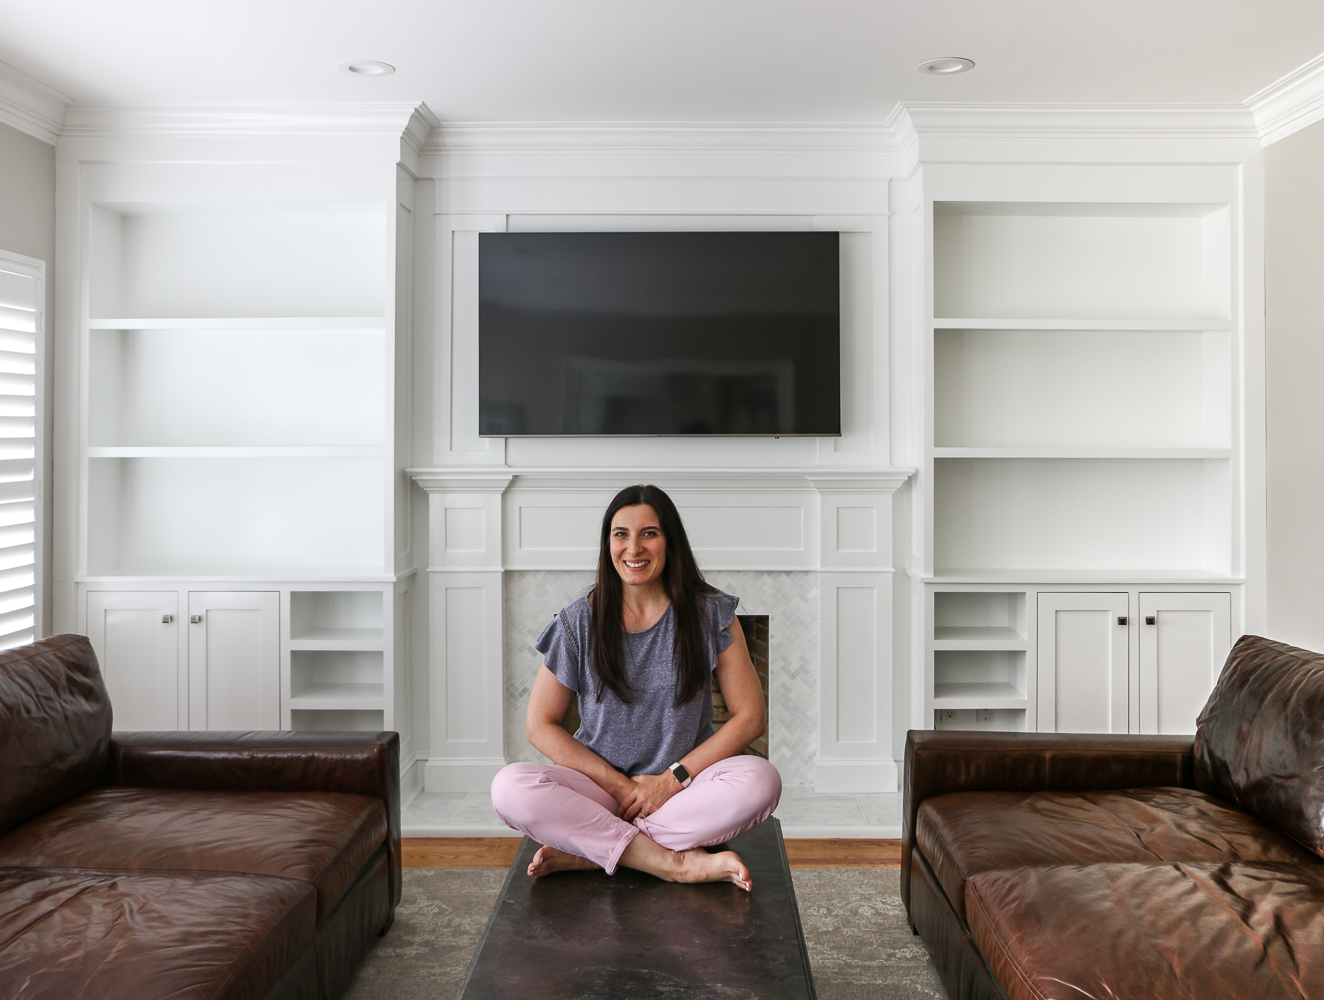 Stefana Silber sitting on coffee table in front of painted fireplace builtin project, open shelves without decor, leather sofas on each side of room